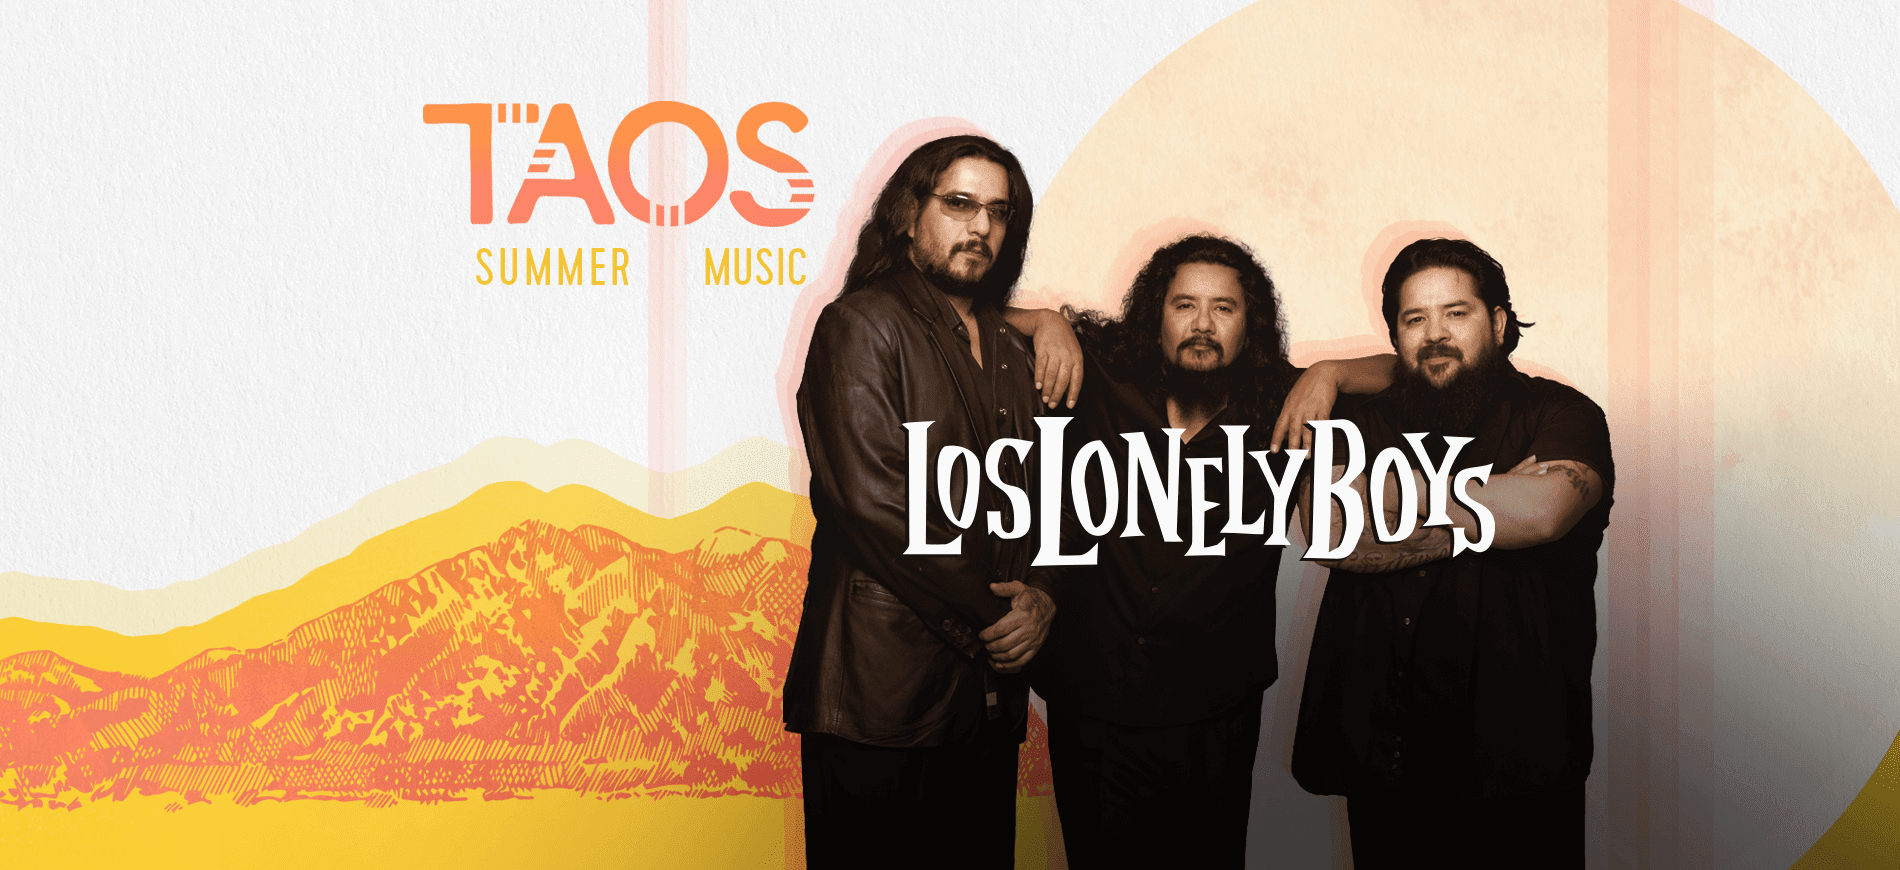 Los Lonely Boys Are coming to Taos!